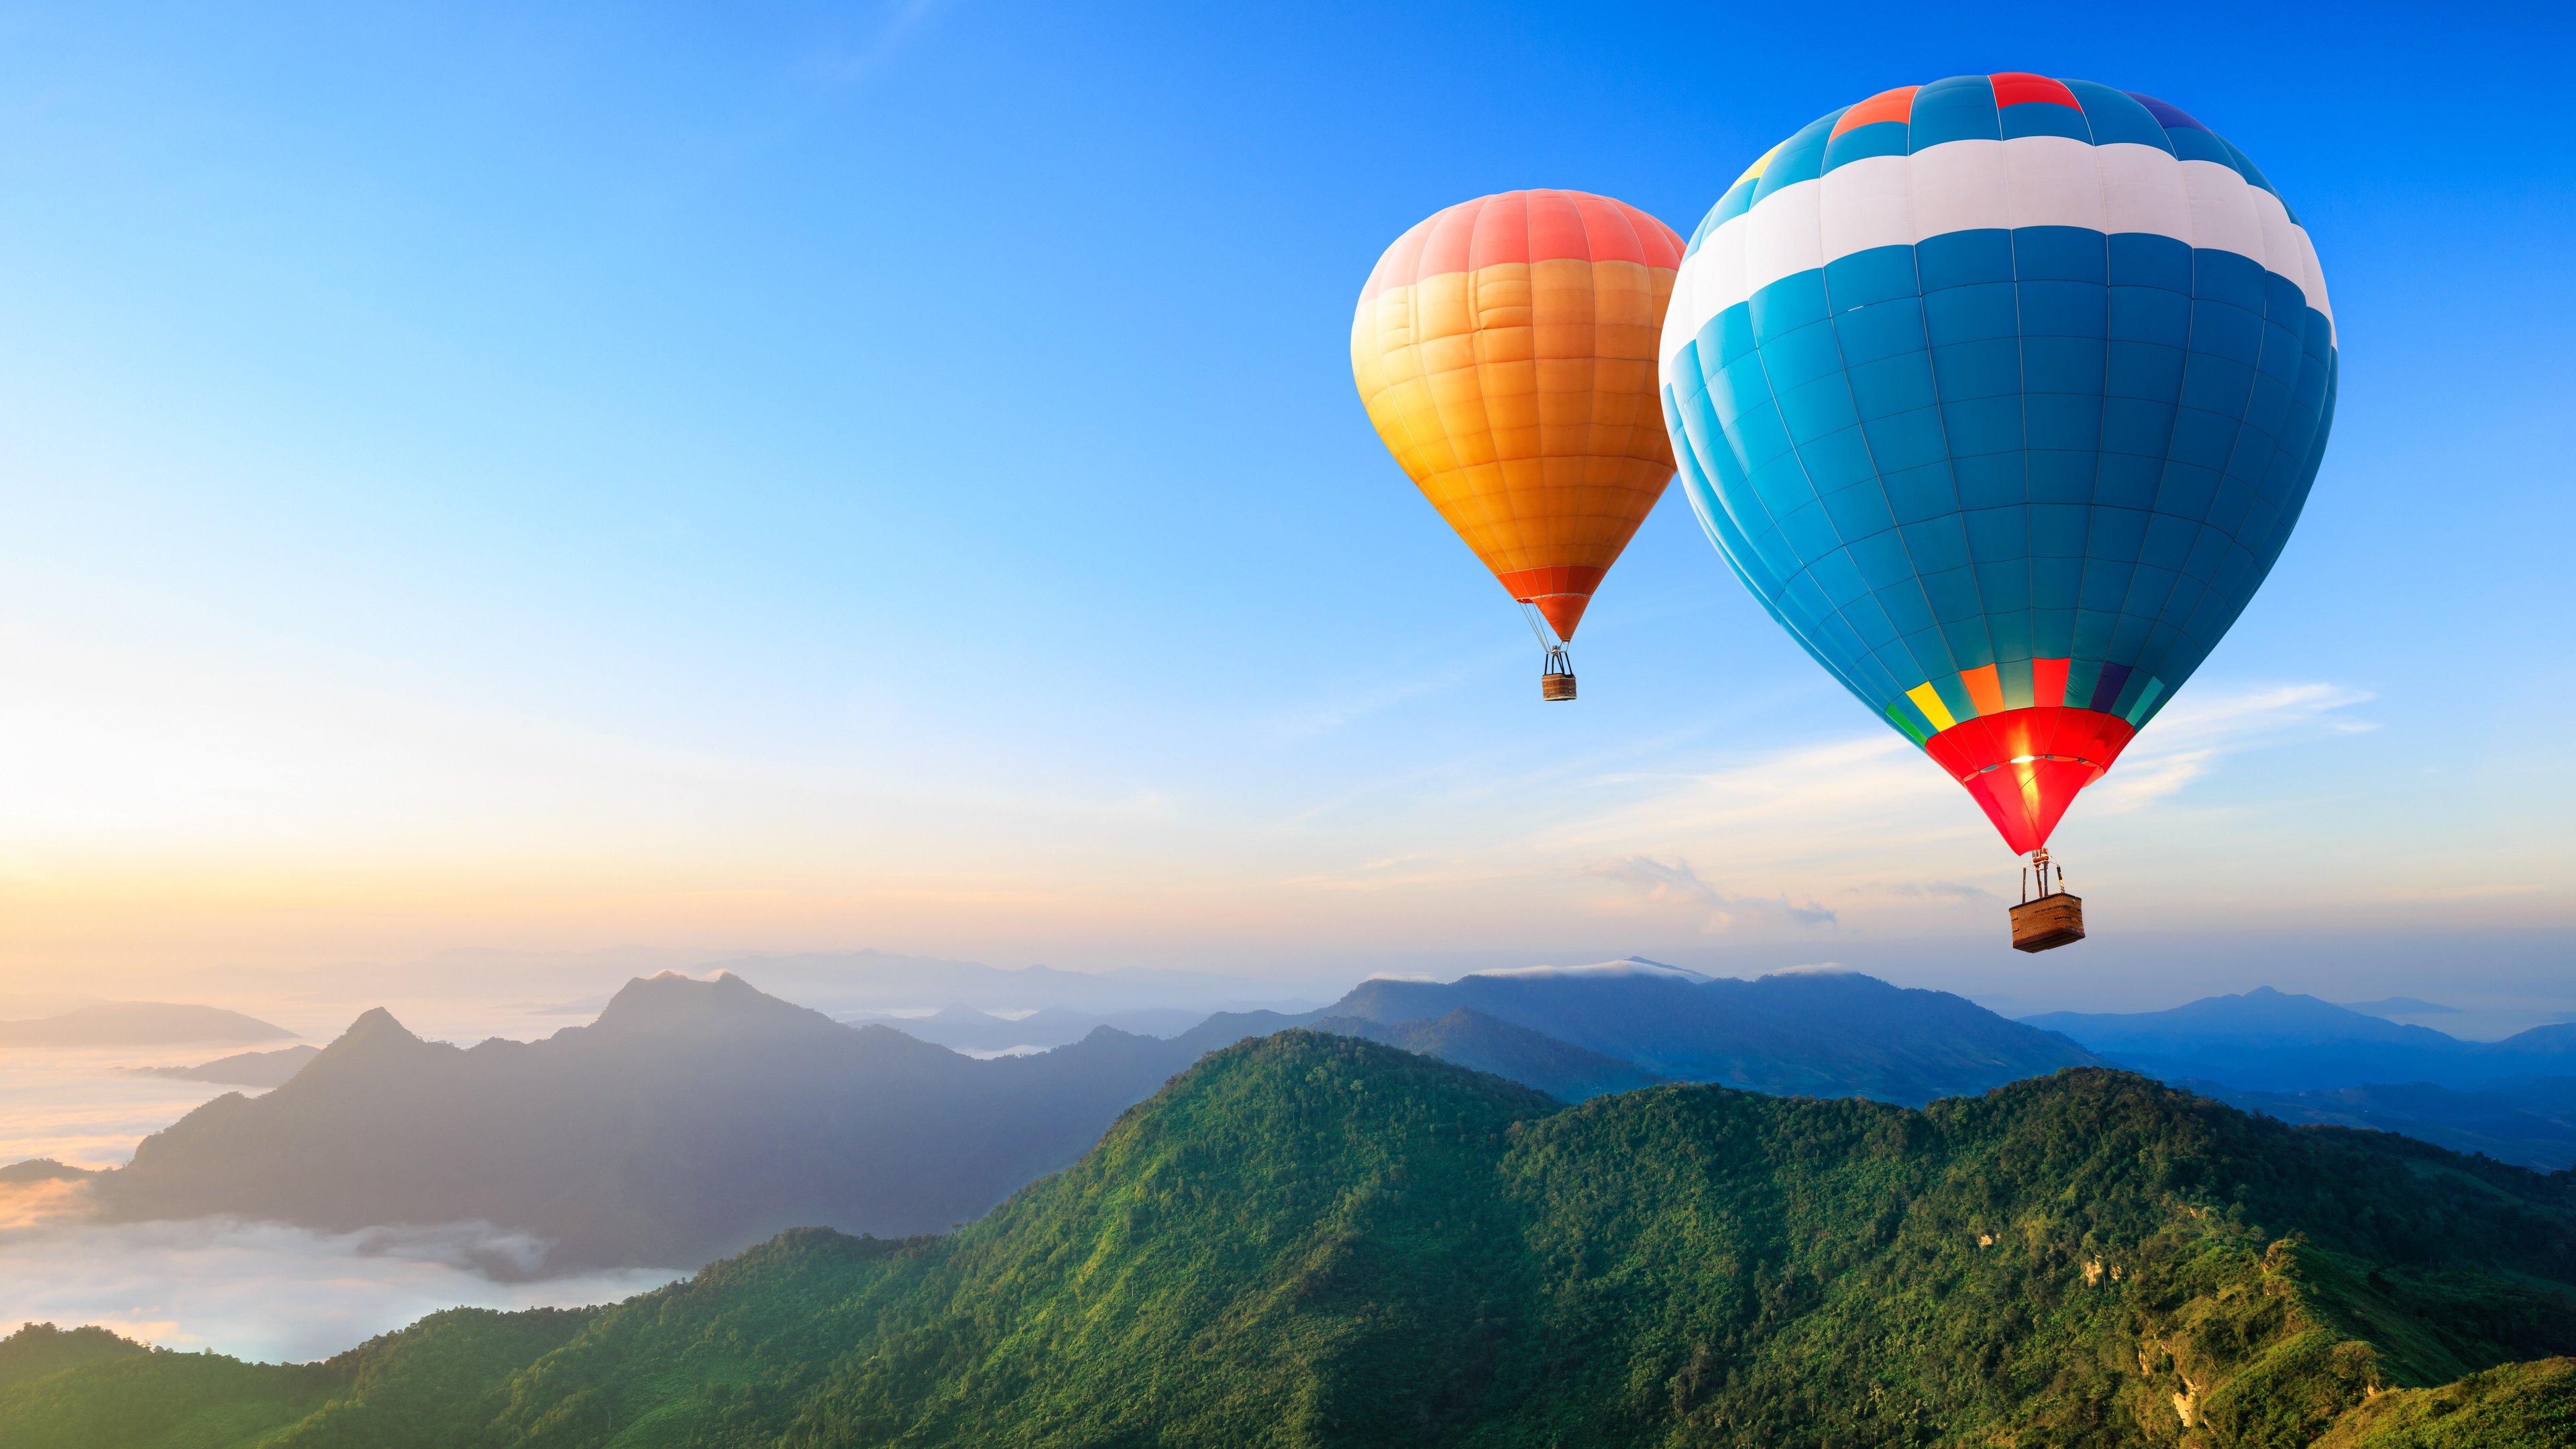 hot air balloons, Landscape, Nature, Mountains, Aerial view, Clouds, Sunset, Forest, Trees, Sky, Blue, Orange, Green, Vehicle Wallpaper